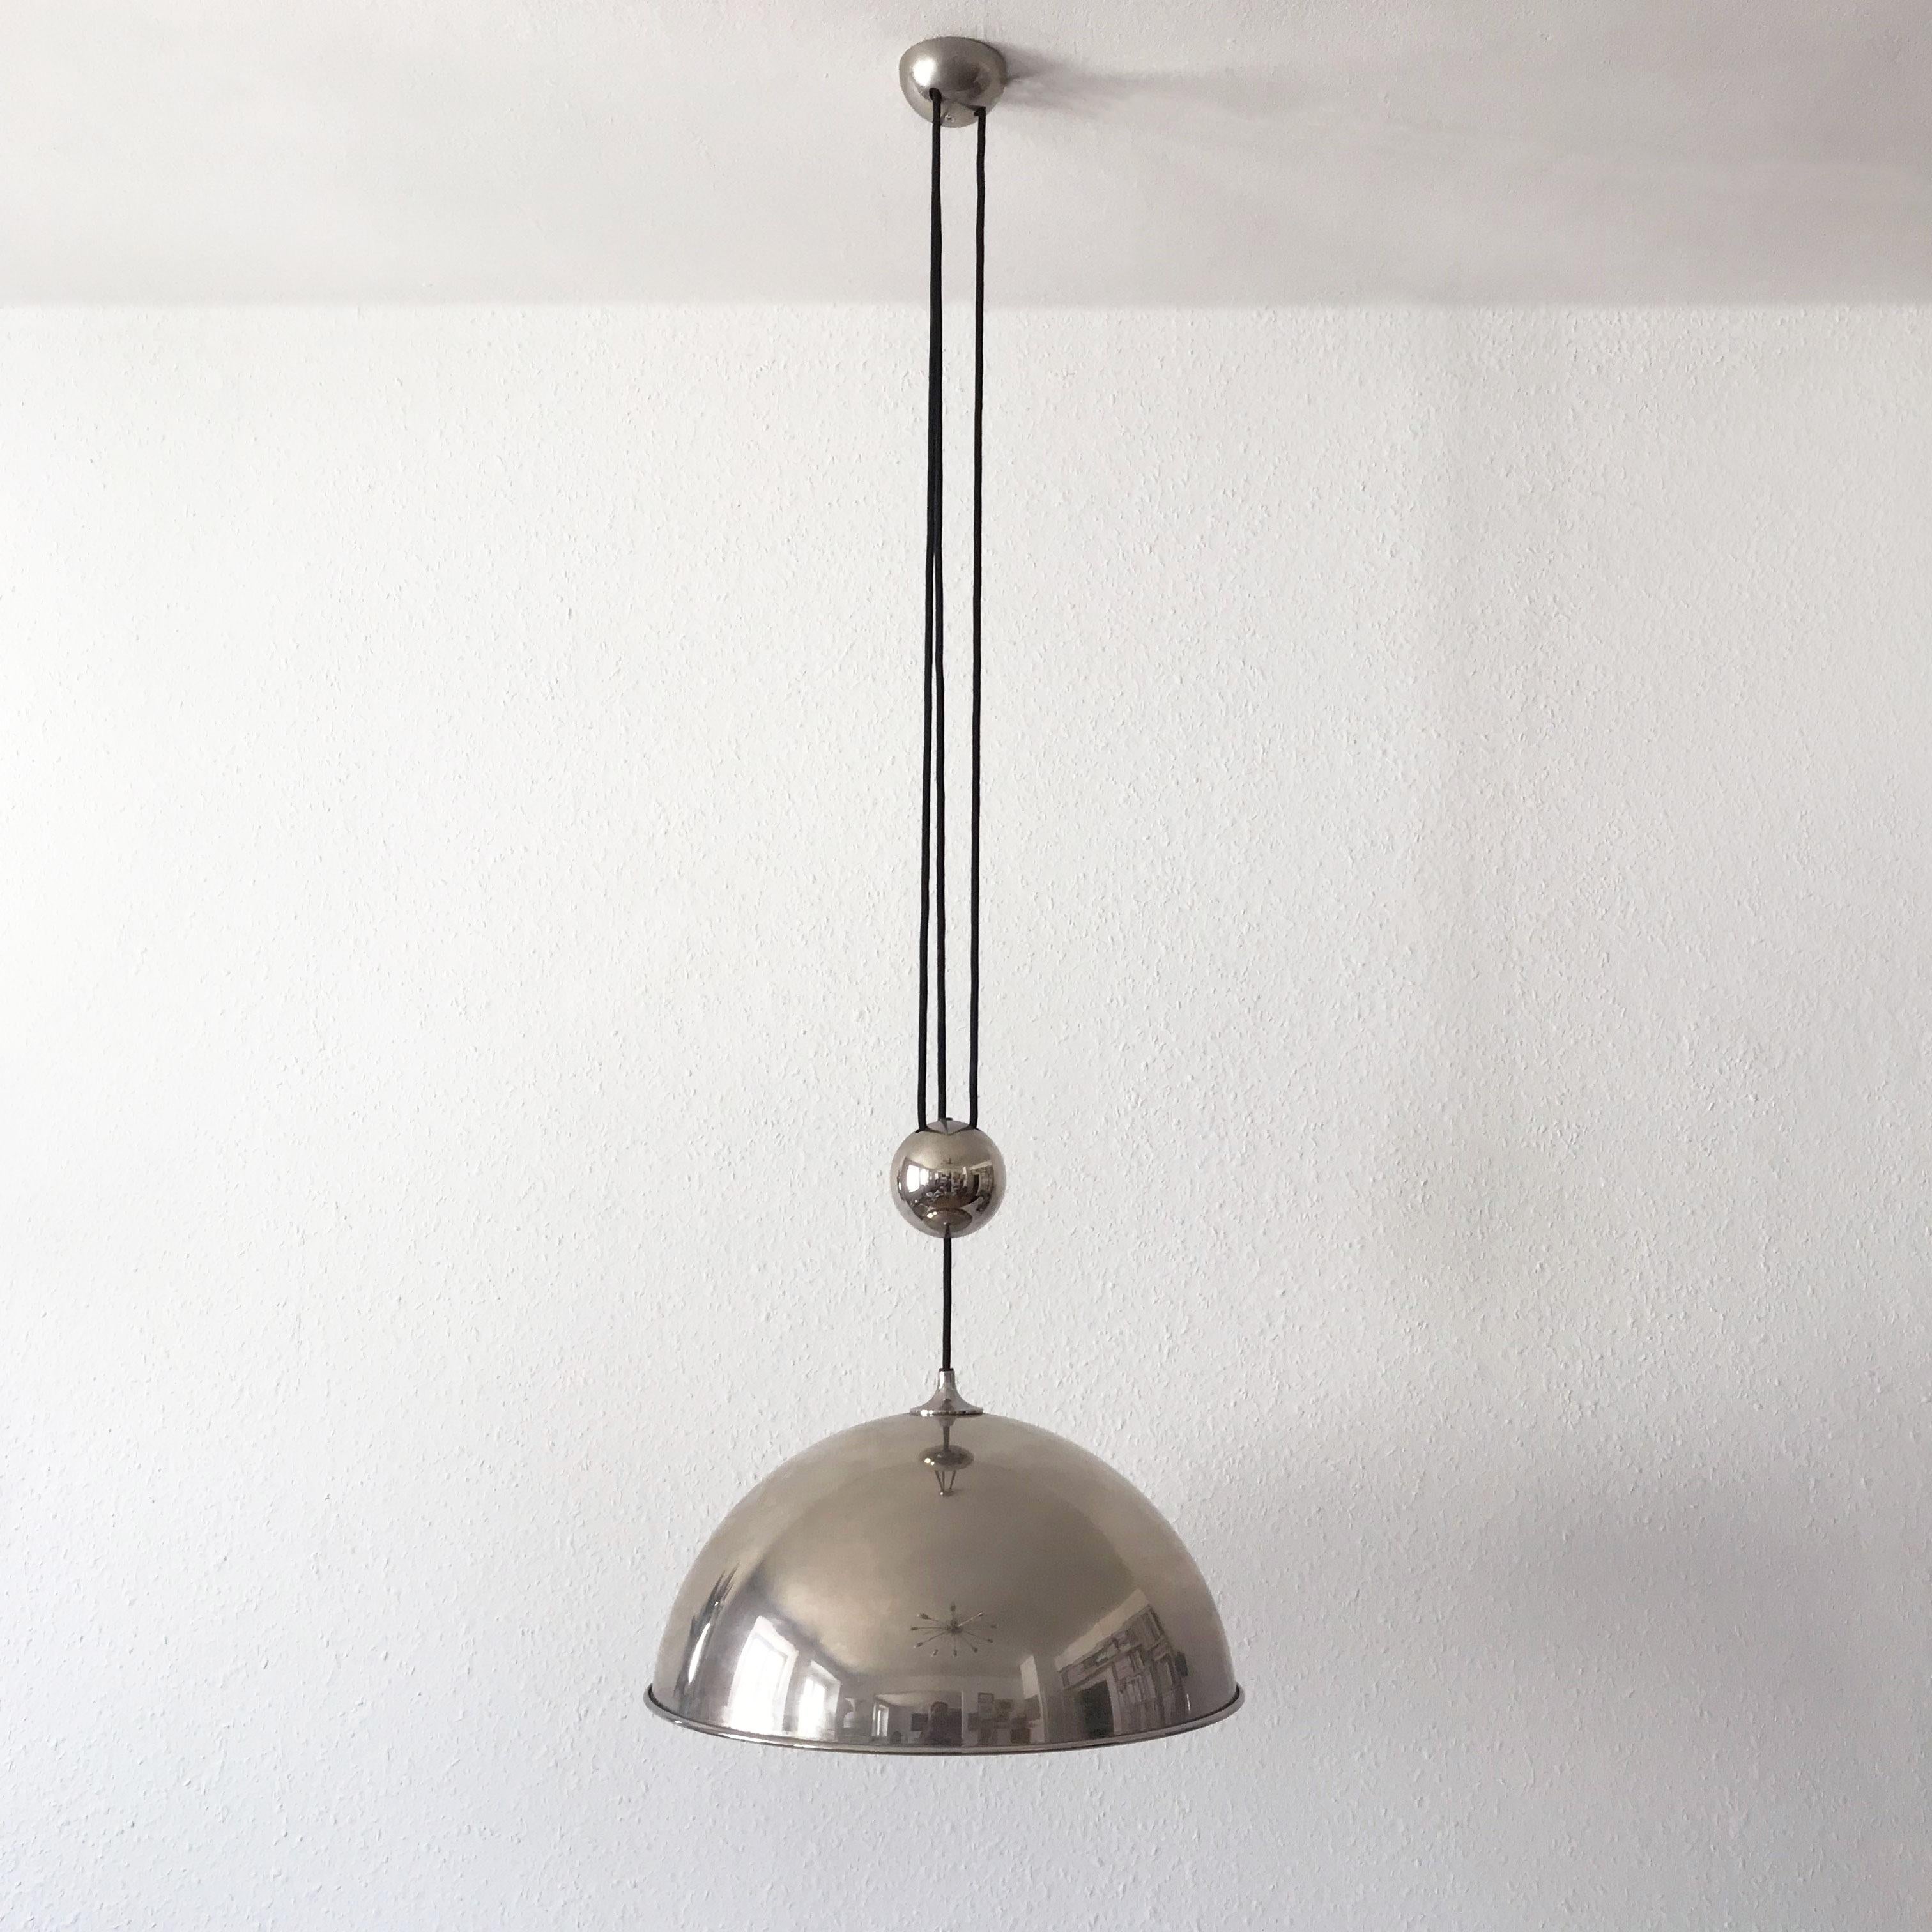 Plated Elegant Counter Balance Pendant Lamp by Florian Schulz Germany 1980s For Sale